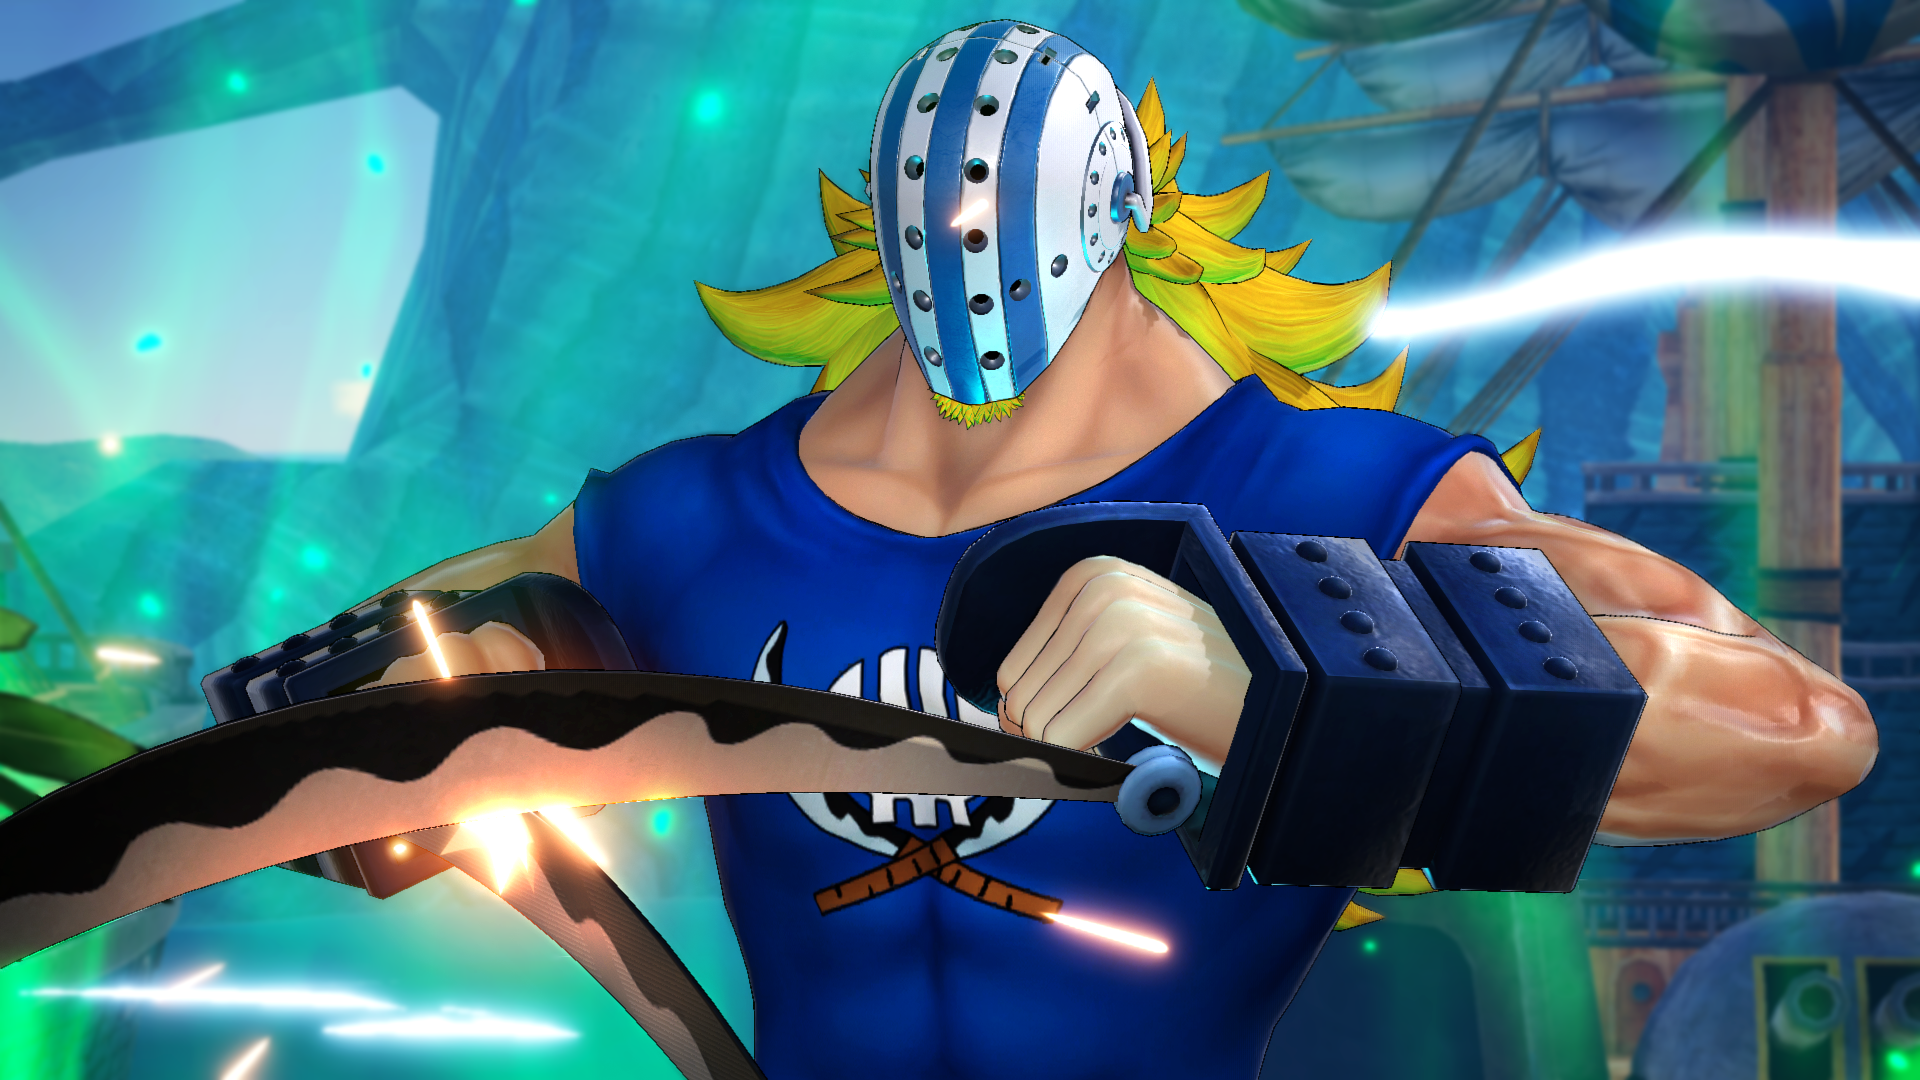 ONE PIECE: PIRATE WARRIORS 4 Character Pass 2 revealed!